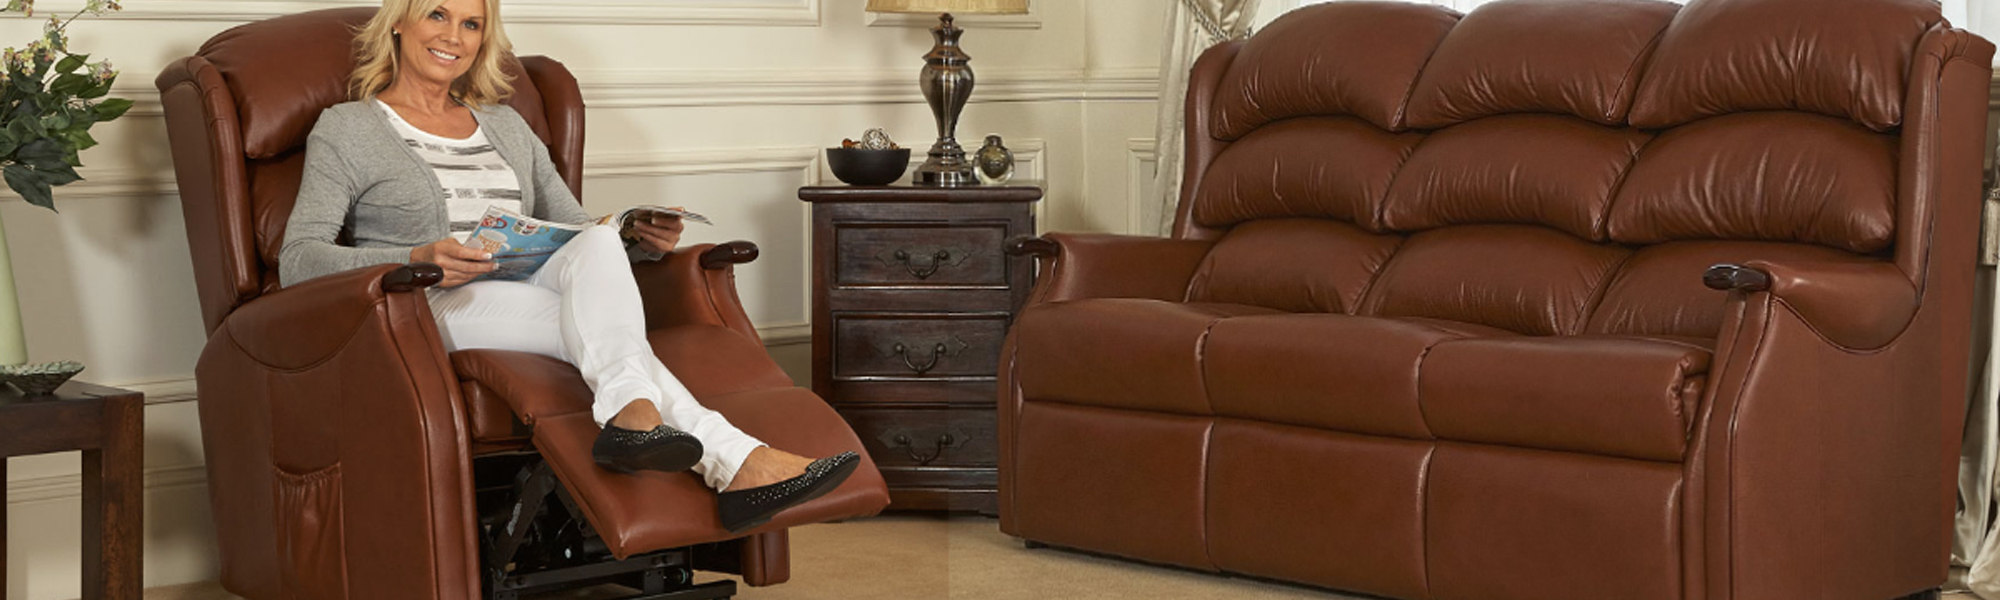 Leather 3 Seater Recliner Sofas